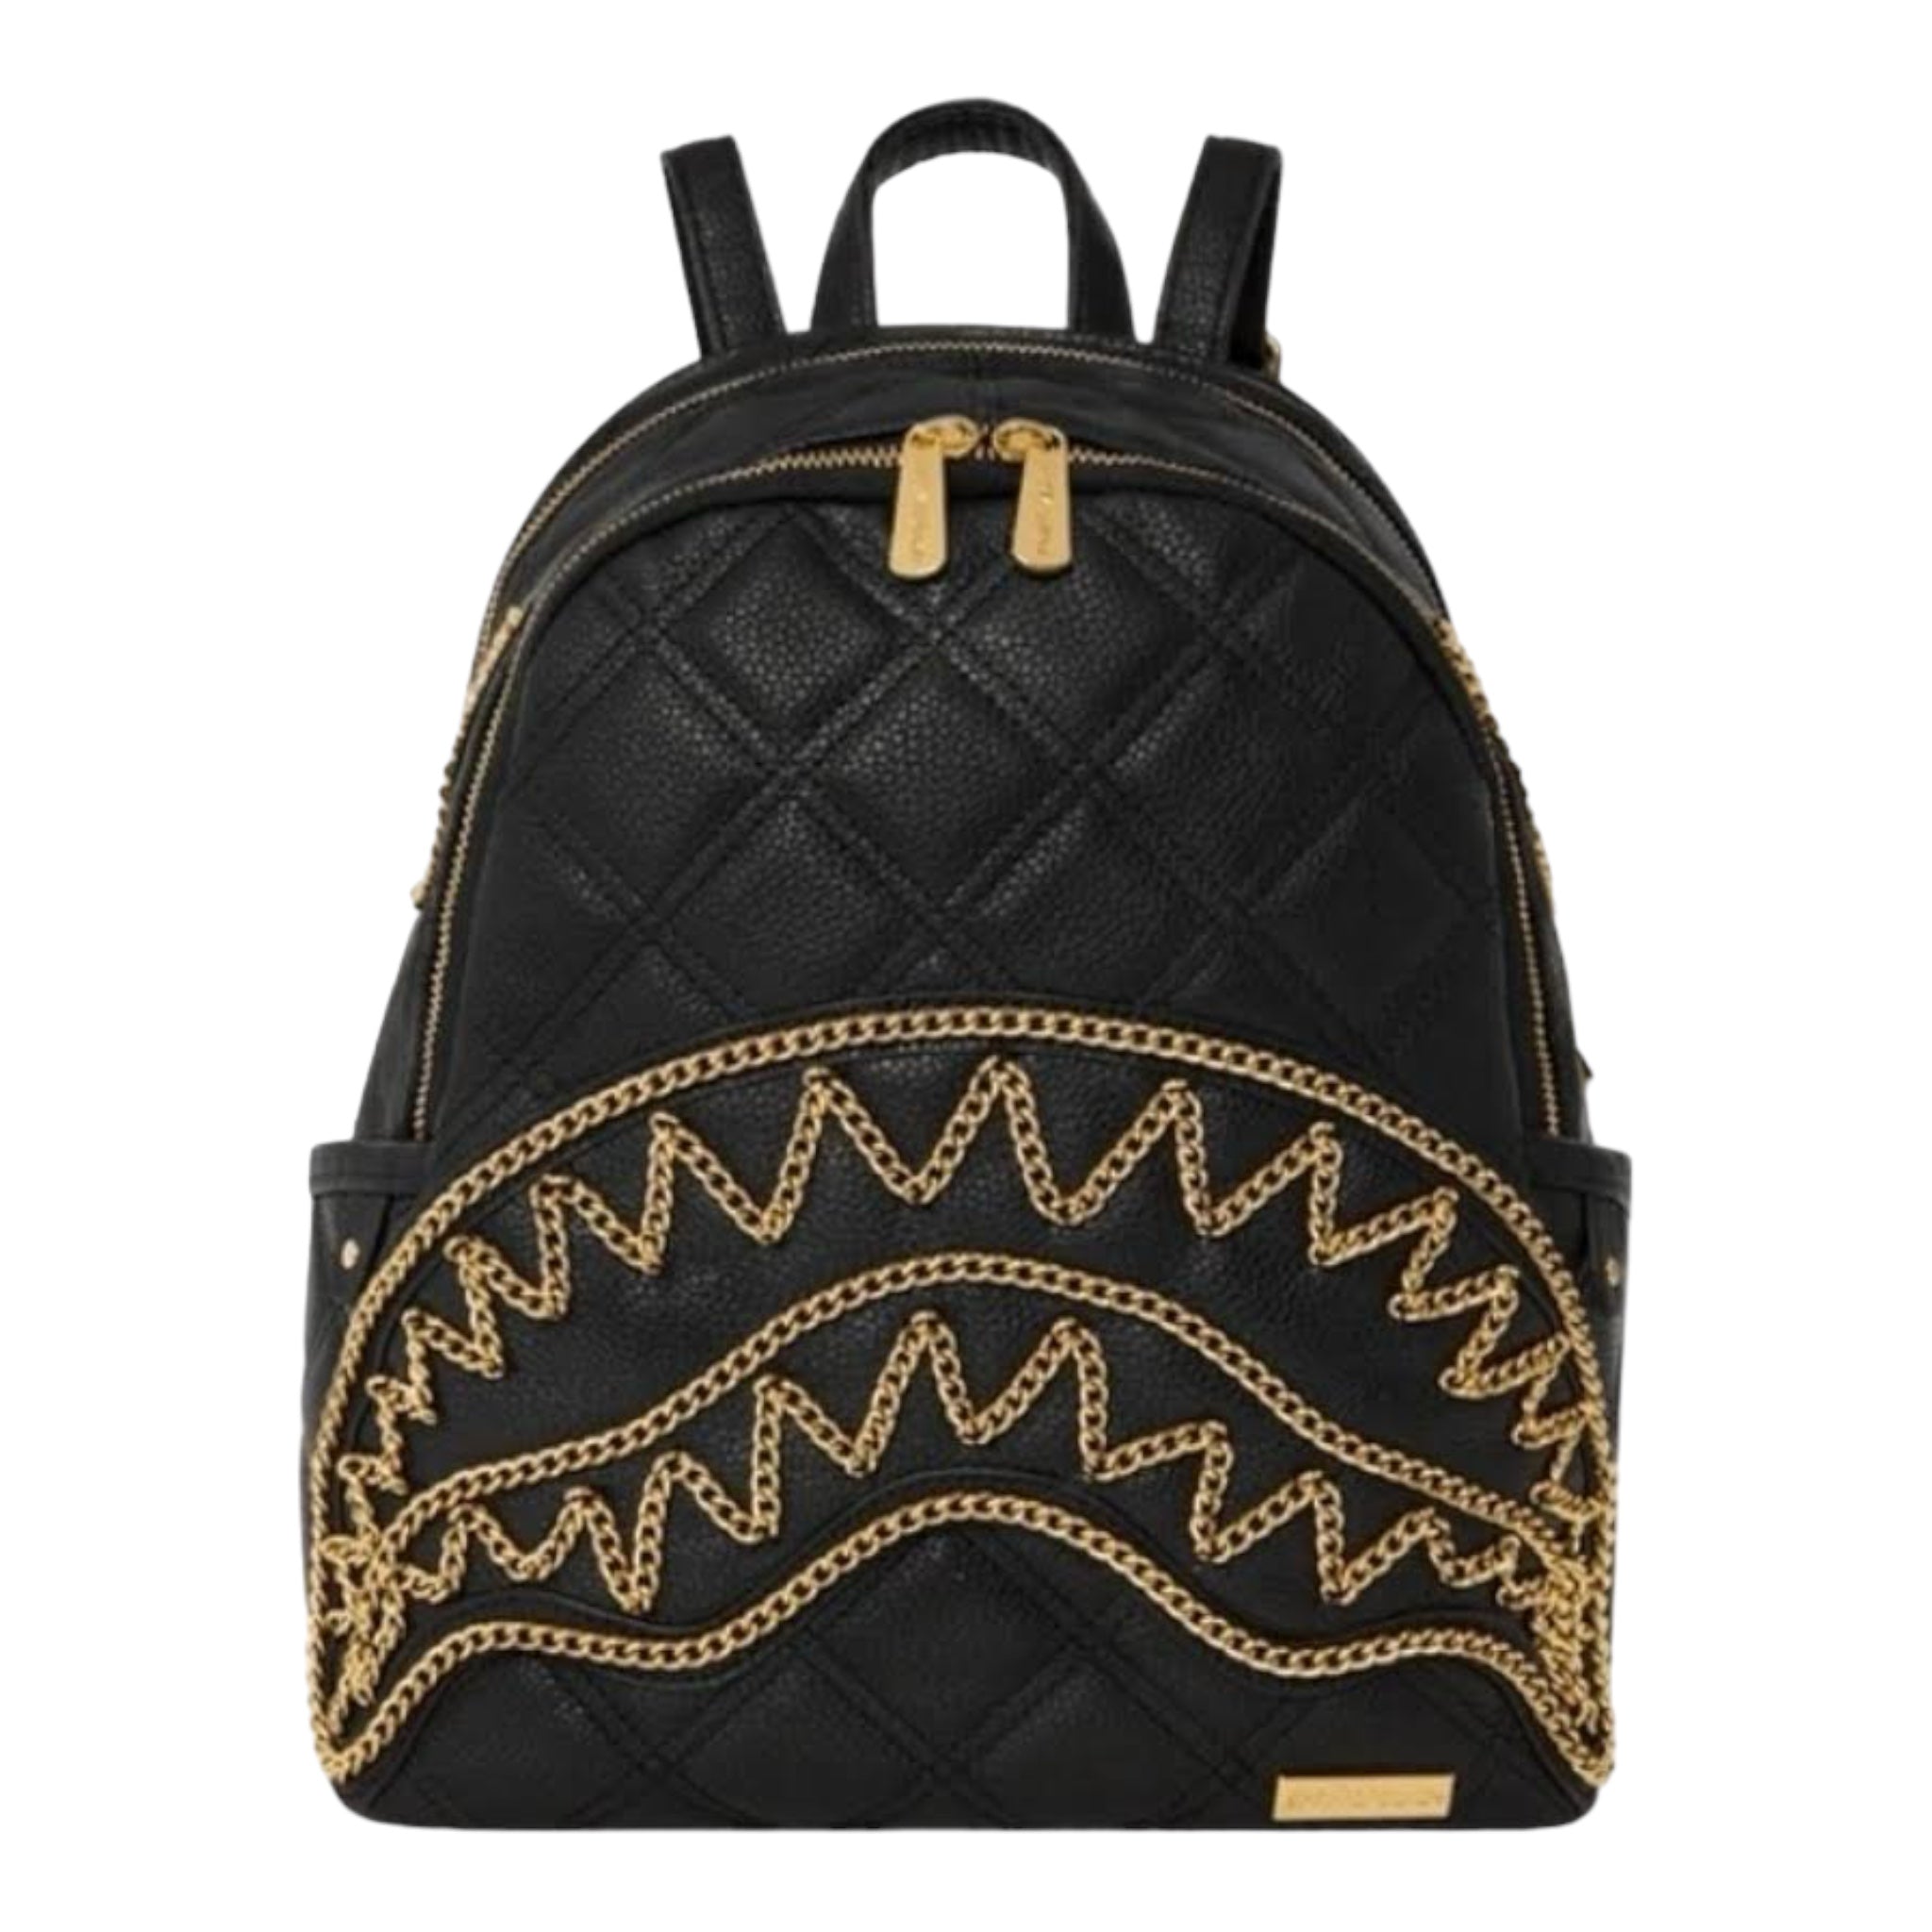 Sprayground Sharks In Paris Quilted Mini Backpack (Black/Gold)